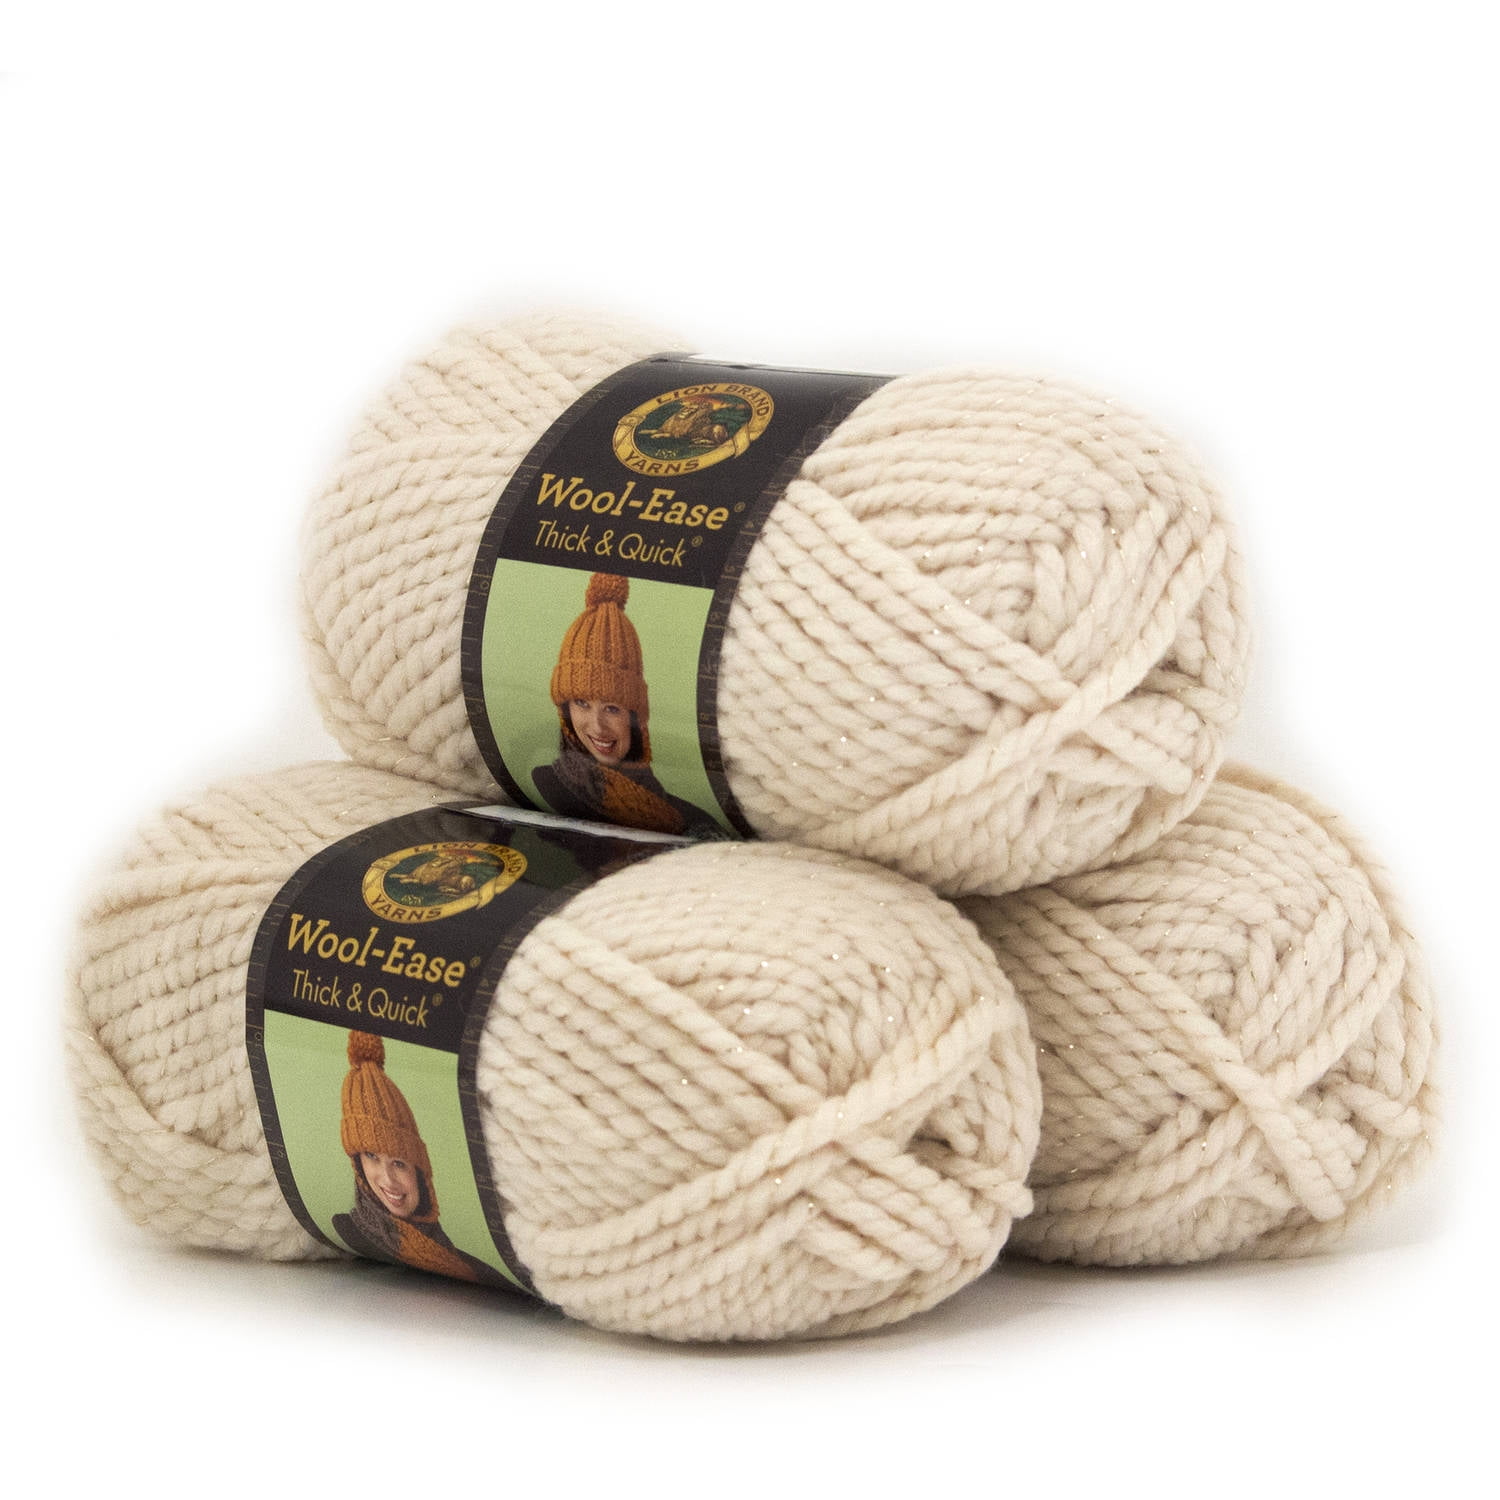 Lion Brand Wool-Ease Thick & Quick Yarn-Night Shadow, 1 count - Kroger